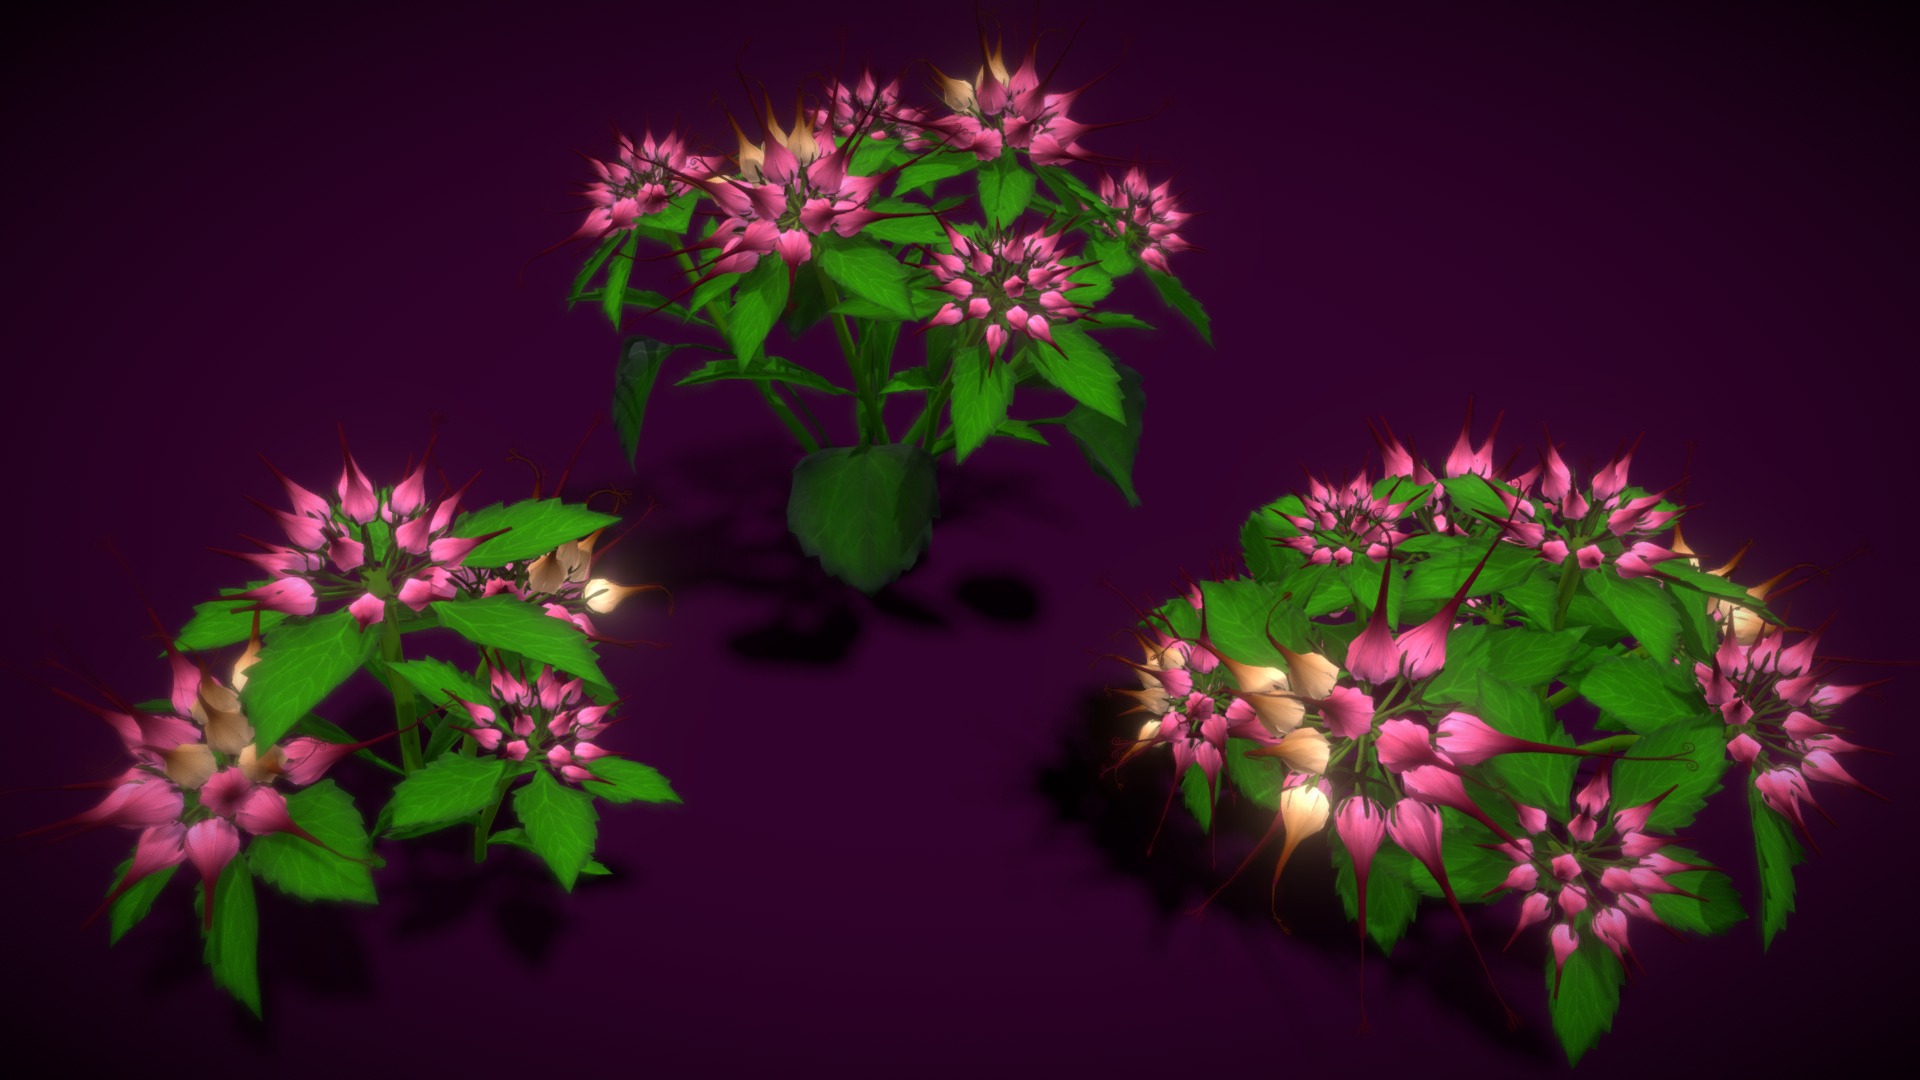 3D model Flower Physoplexis Omosa - This is a 3D model of the Flower Physoplexis Omosa. The 3D model is about a group of pink flowers.